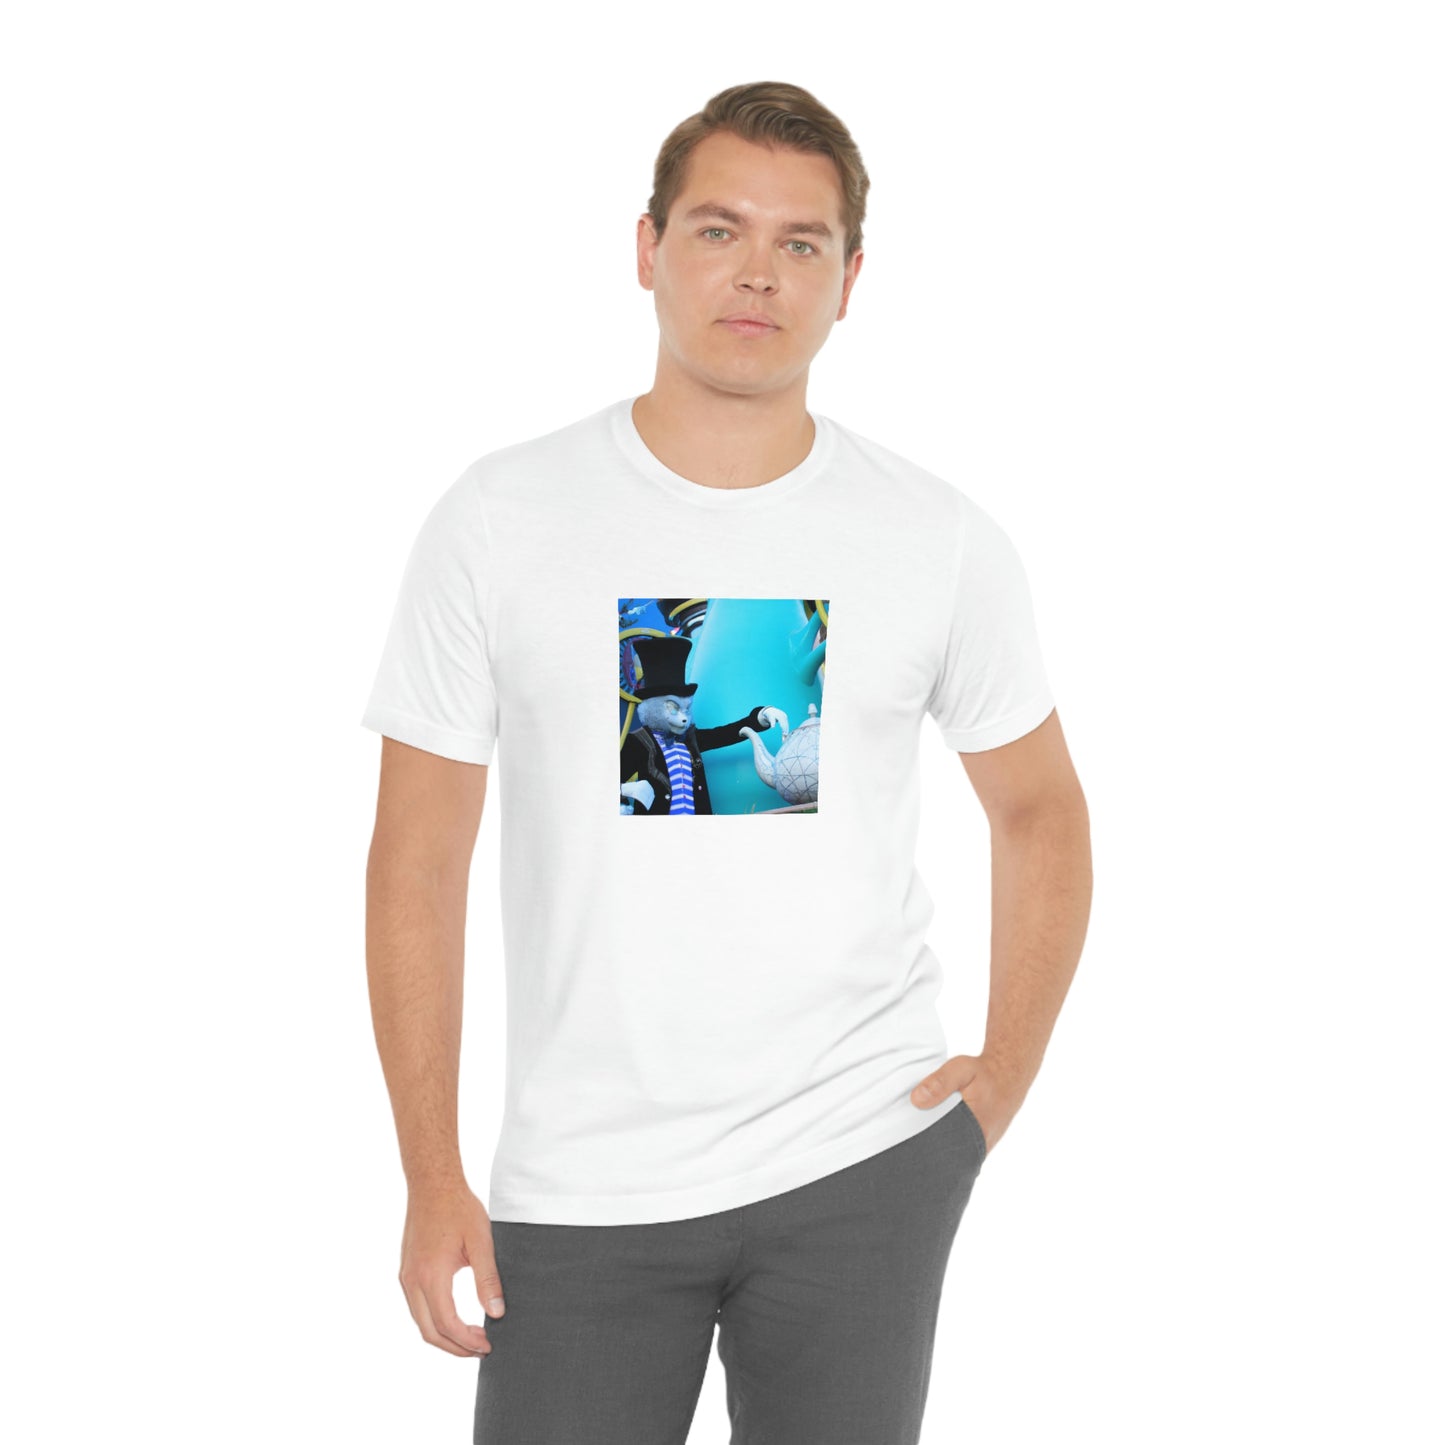 Curiouser in Cyberspace! - tshirt